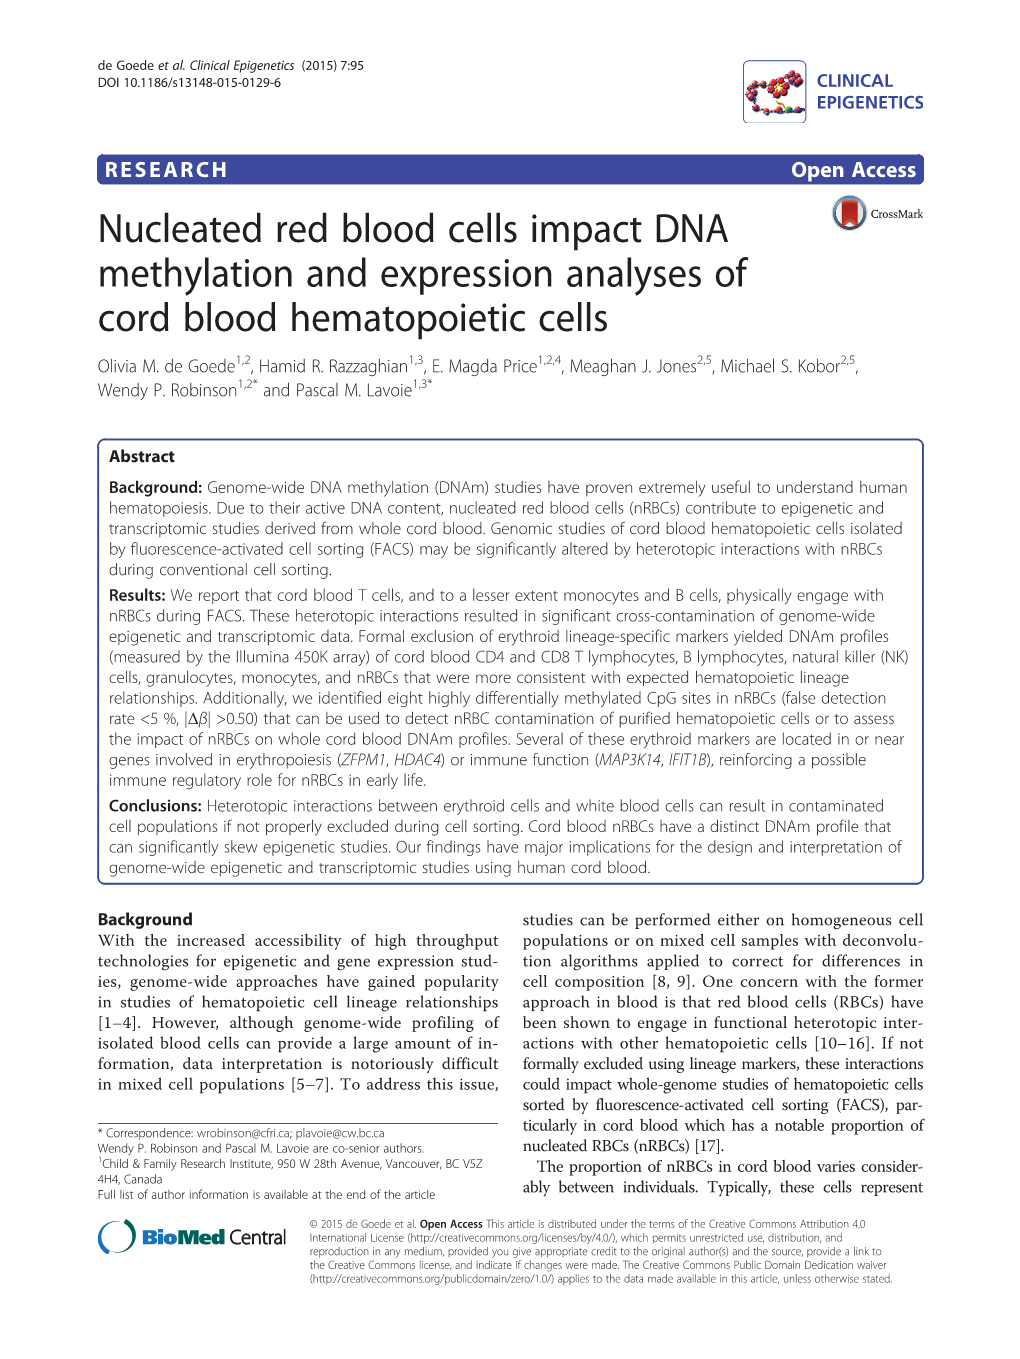 Nucleated Red Blood Cells Impact DNA Methylation and Expression Analyses of Cord Blood Hematopoietic Cells Olivia M